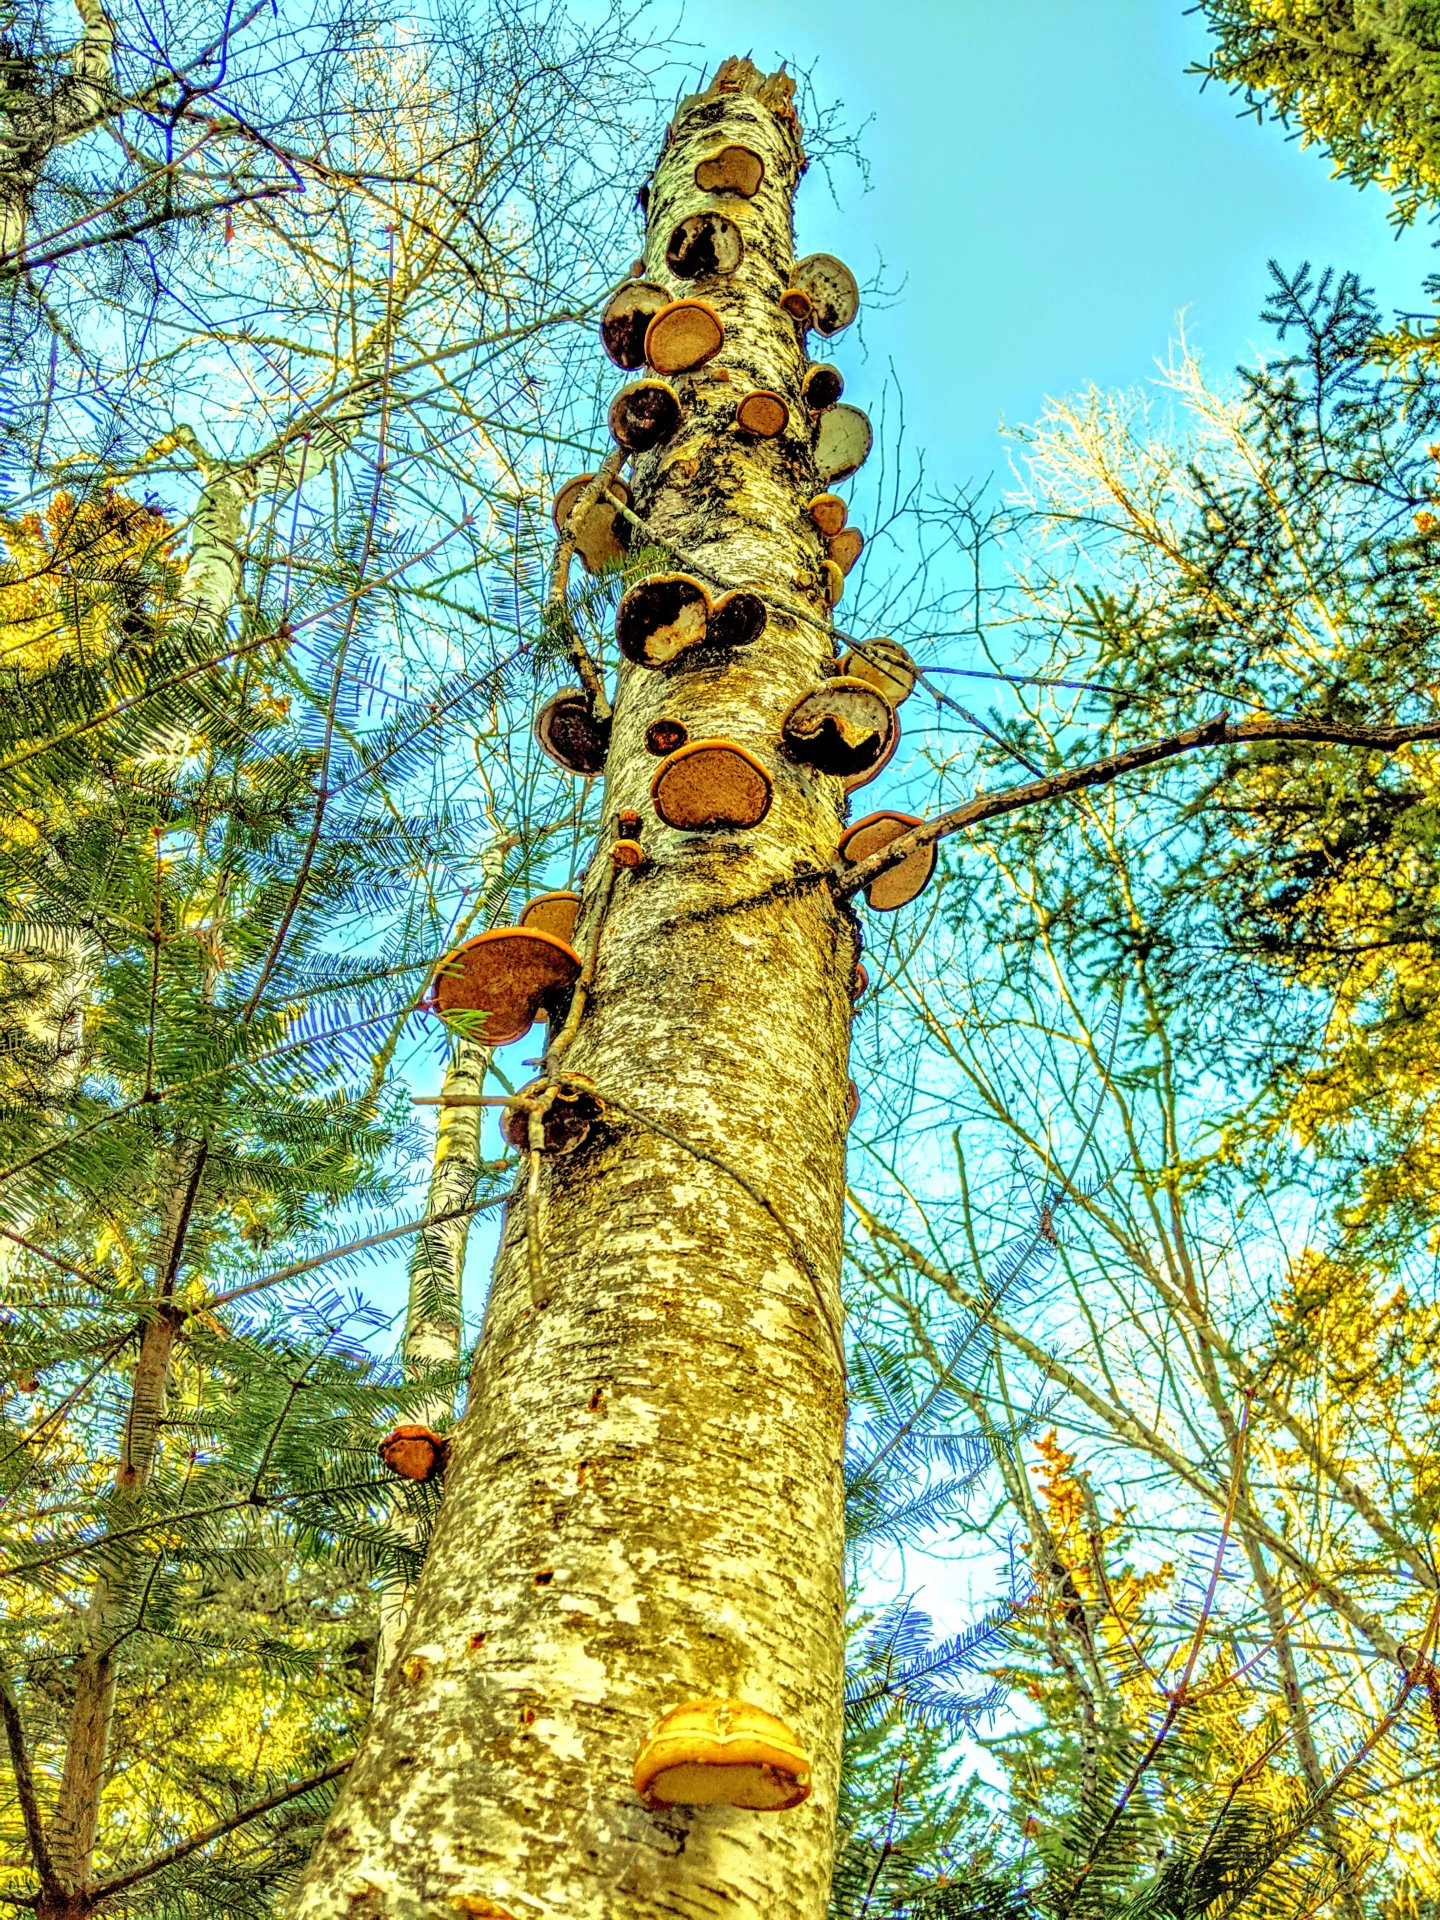 A bunch of mushrooms growing up a dead tree in downeast, Maine.